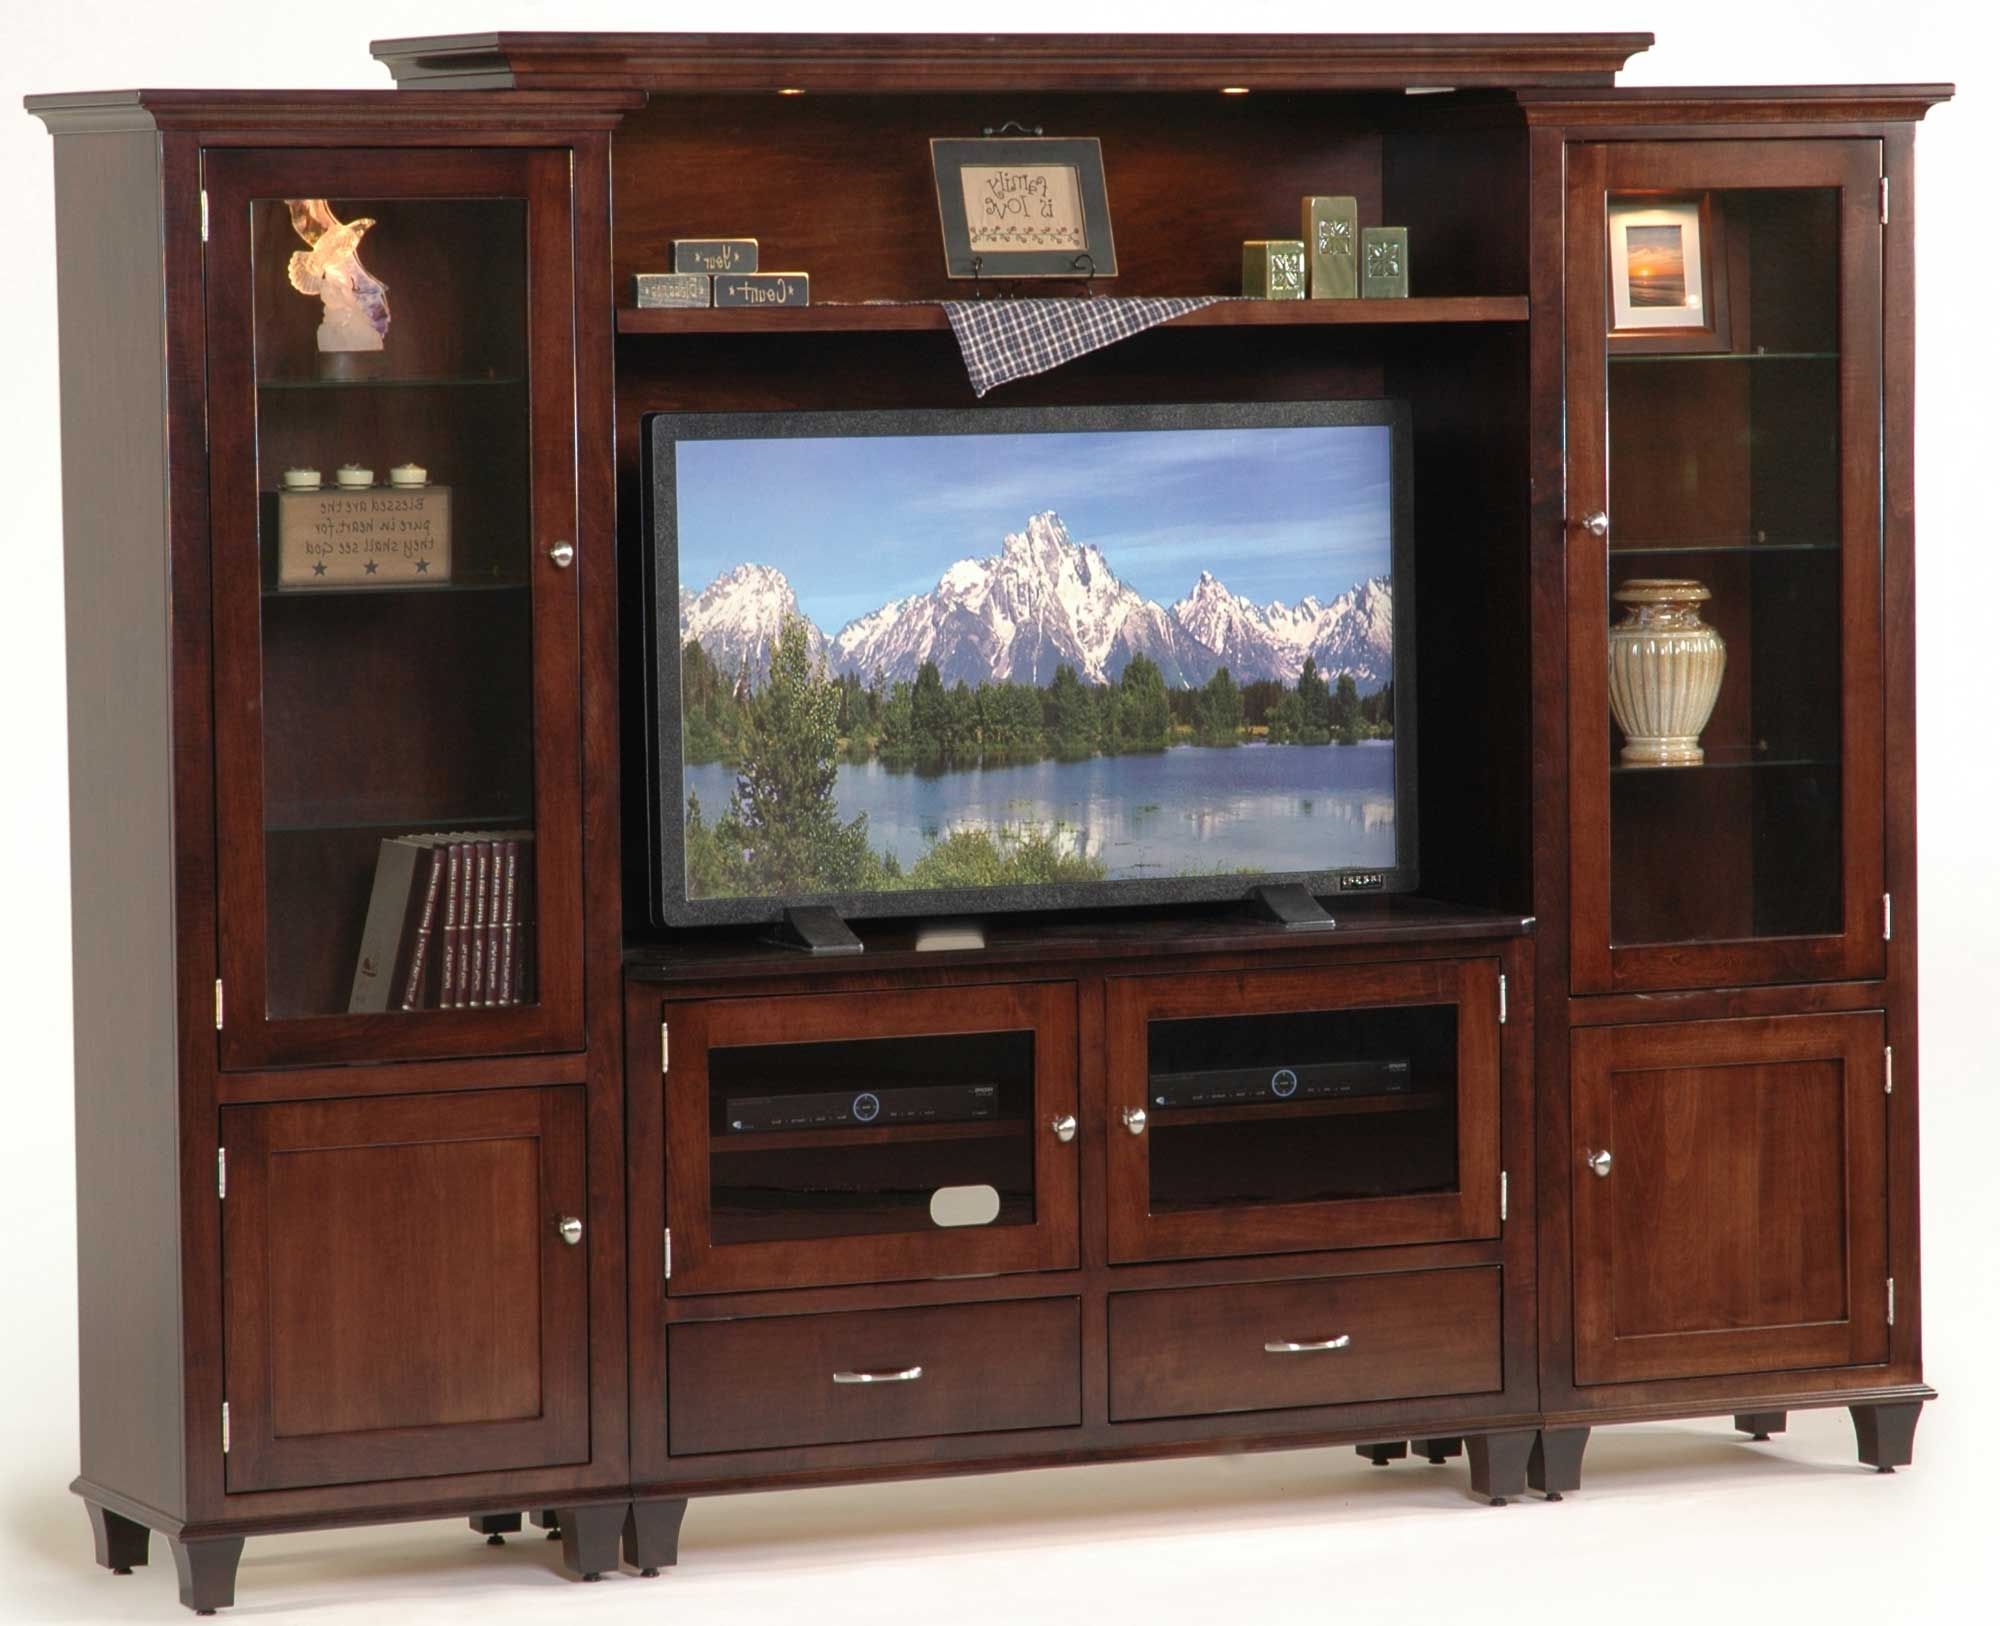 Wall Entertainment Unit | Furniture Tree In Entertainment Units With Bridge (View 16 of 20)